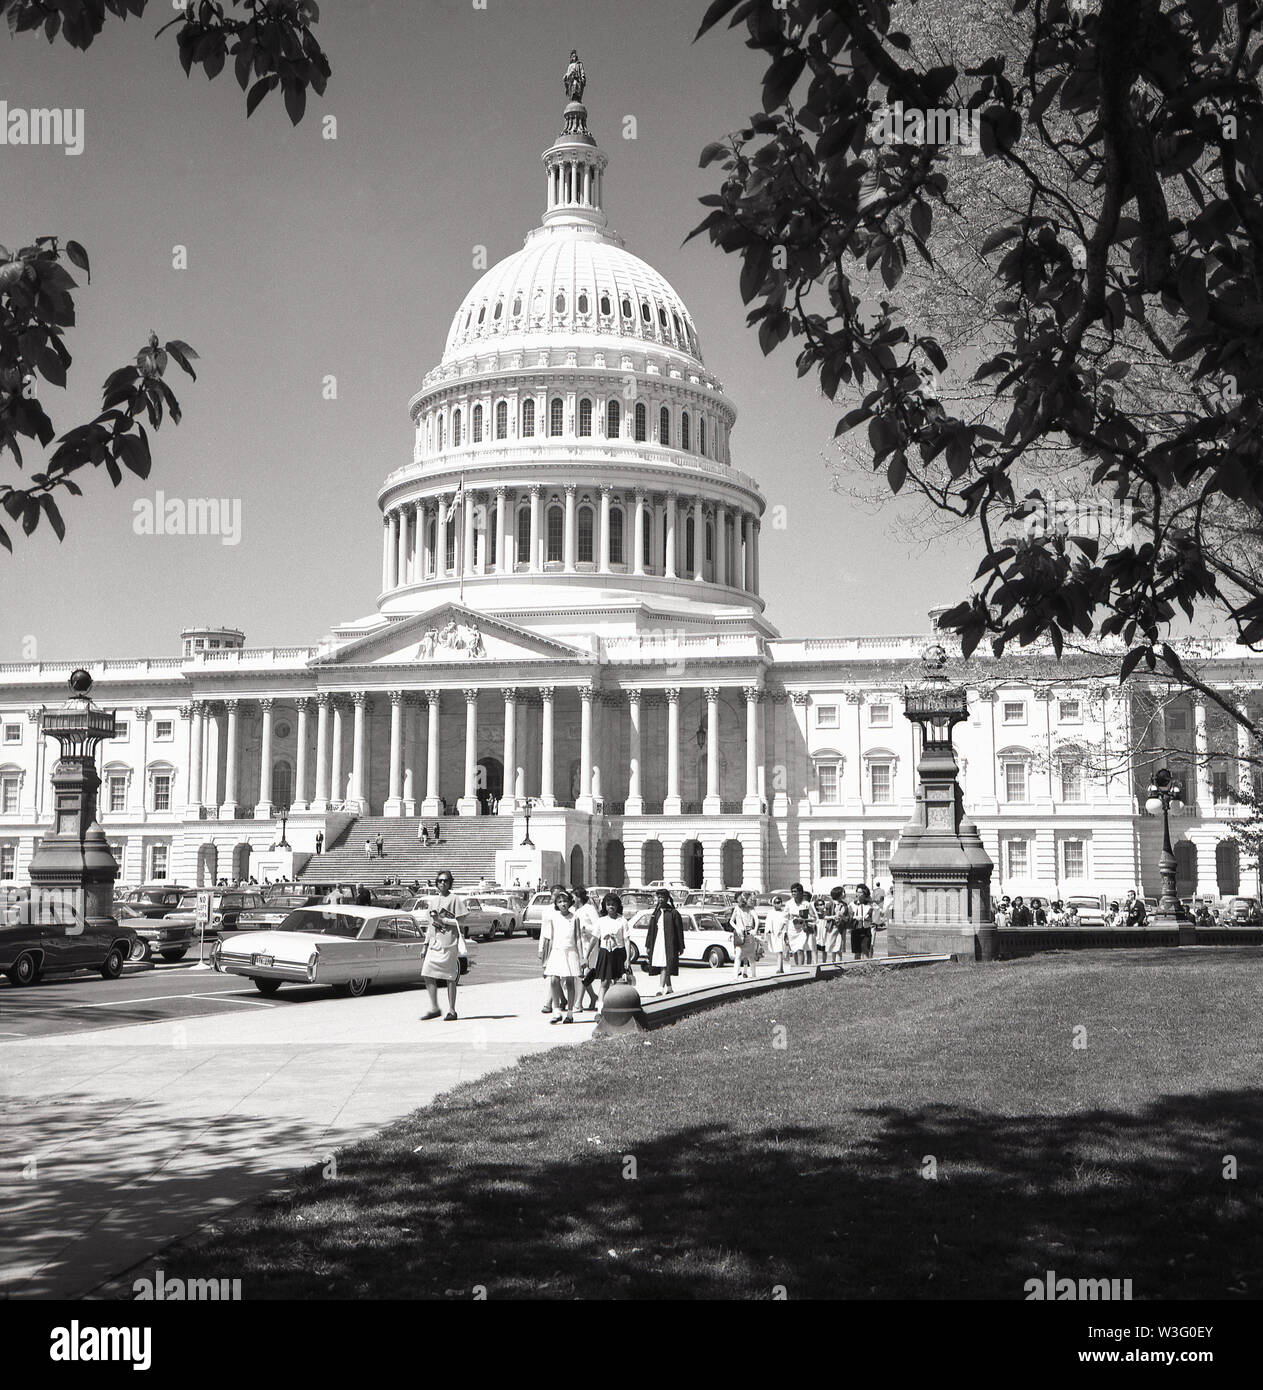 1950s, historical, Washington D.C, USA, picture from this era of the Capitol Building, the home of the US Congess and the seat of the legislative branch of the U.S Federal Government. Built in a neoclassical design, when it was expanded in the 1850s, a large cast-iron dome replaced the original smaller lower dome of 1818. Stock Photo